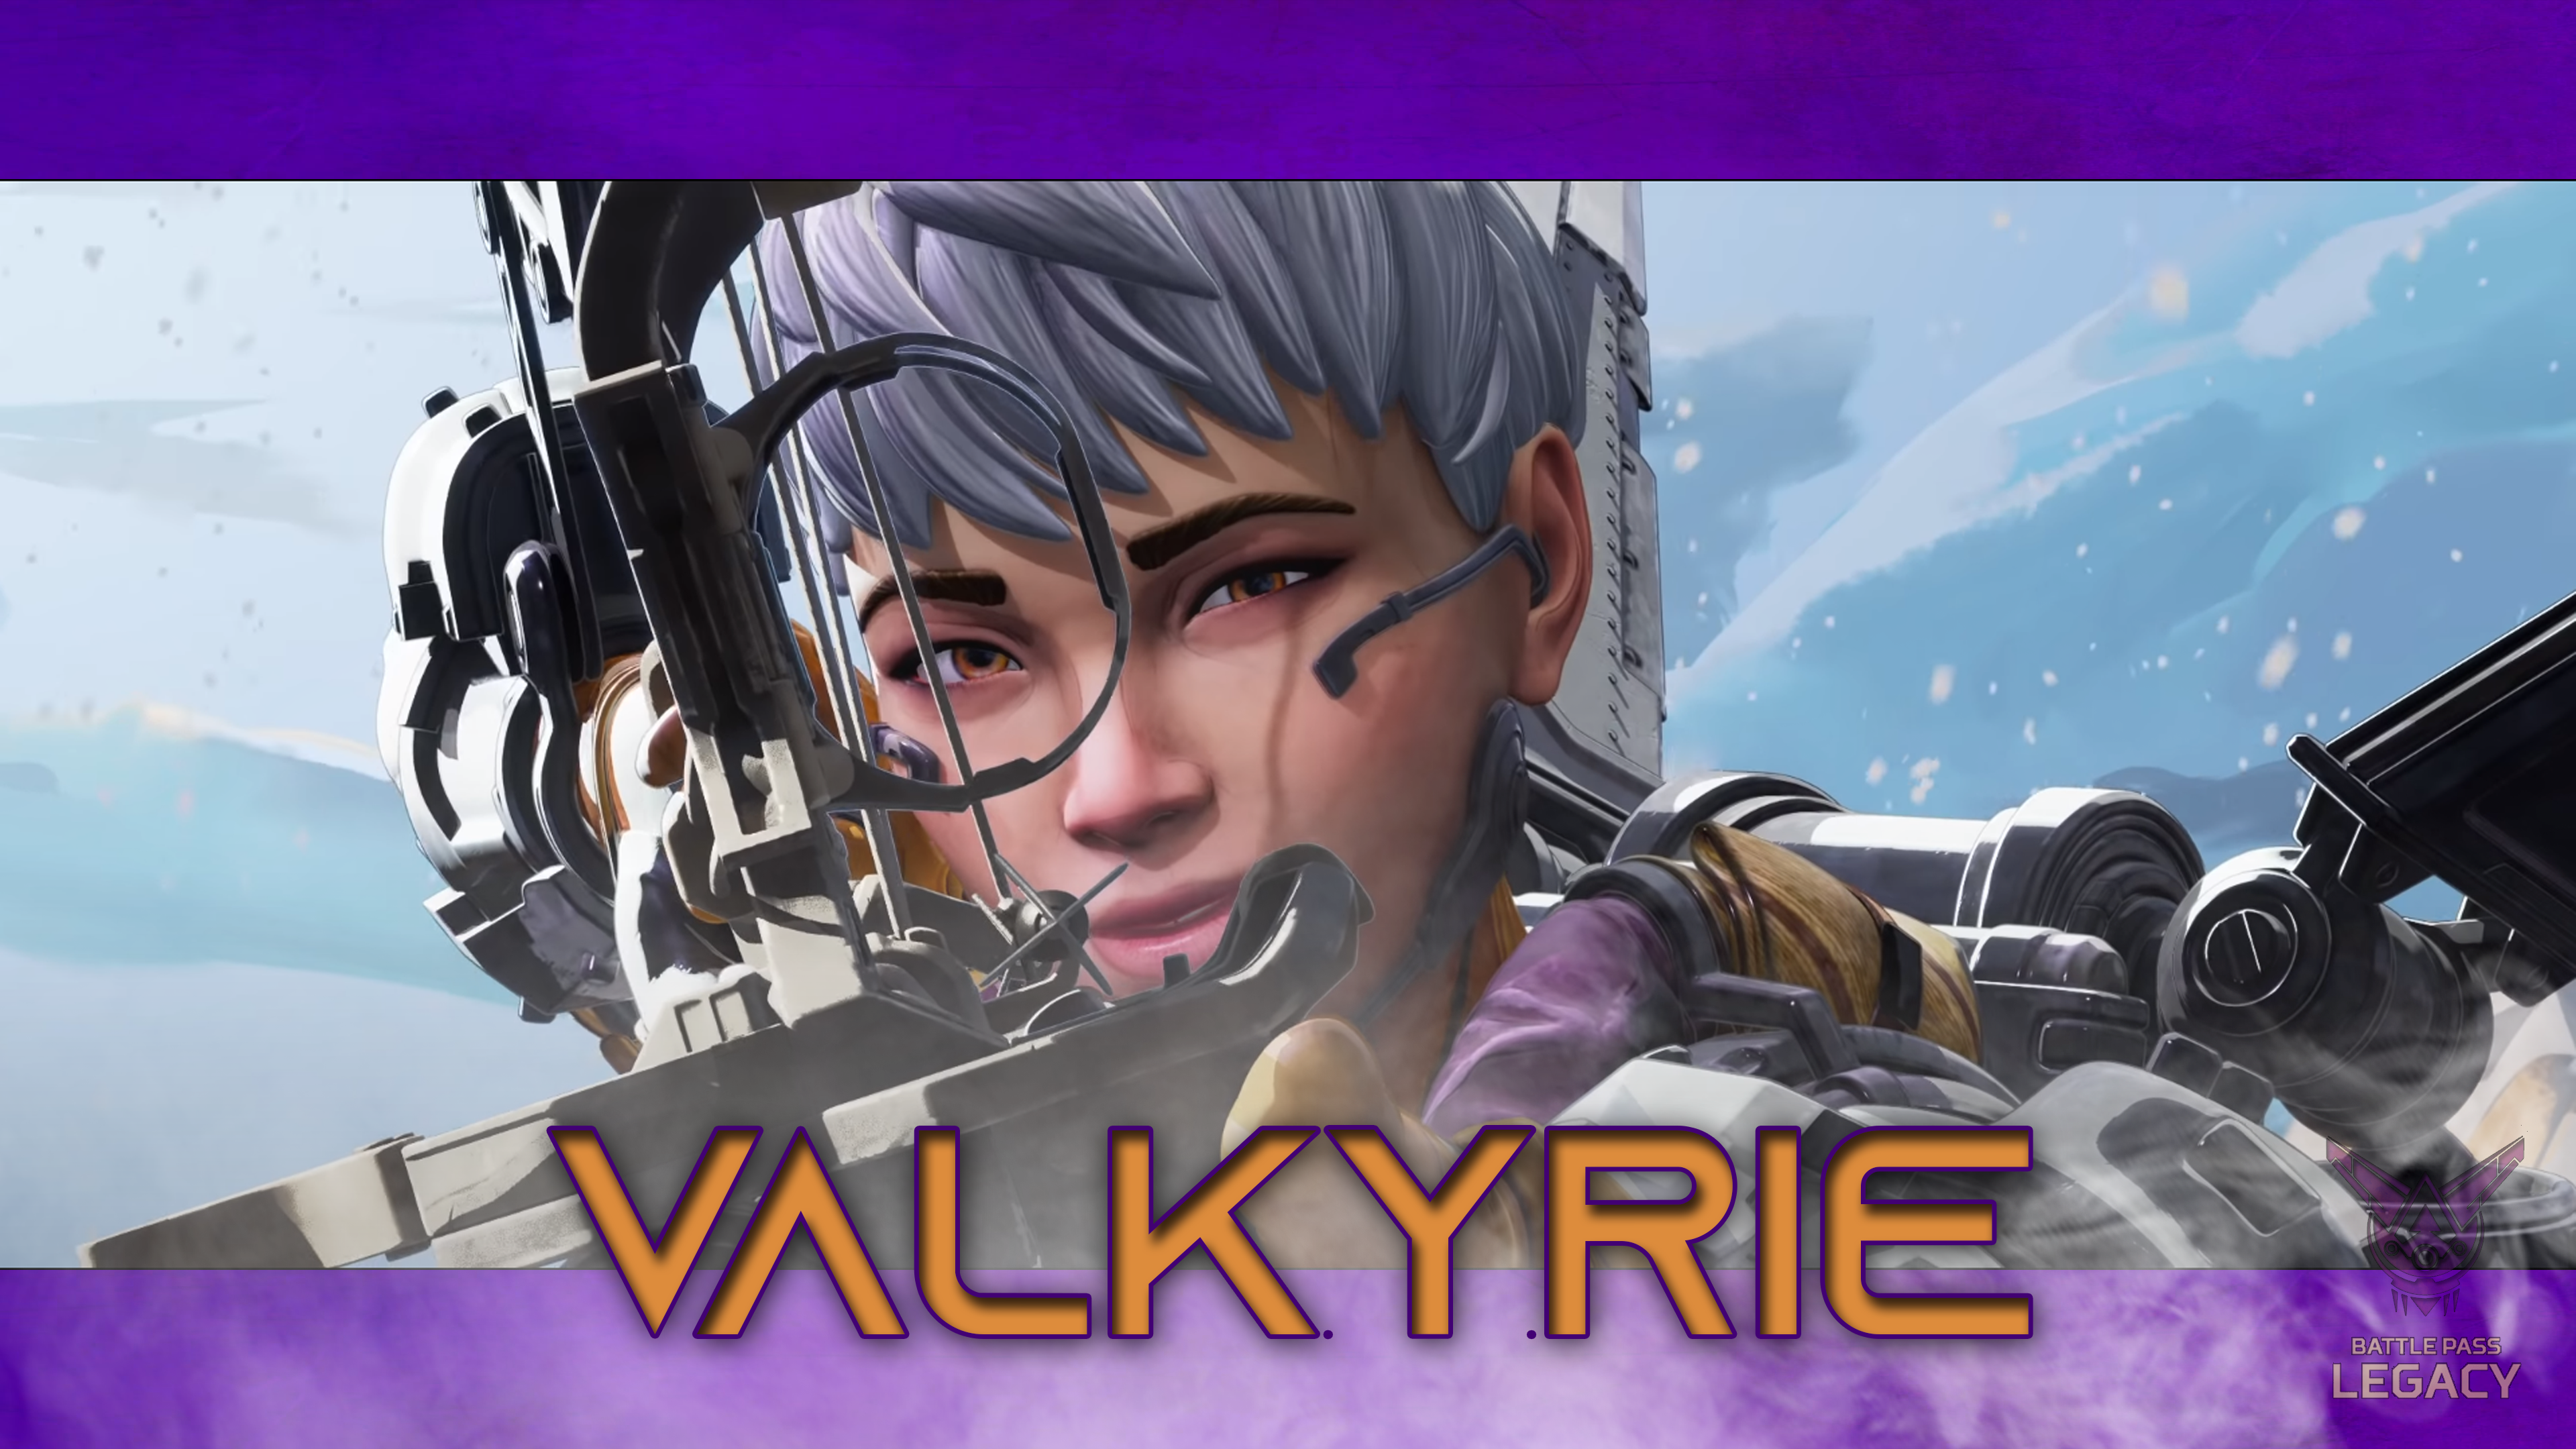 Valkyrie Wallpaper 4K (Use as and if you want!)